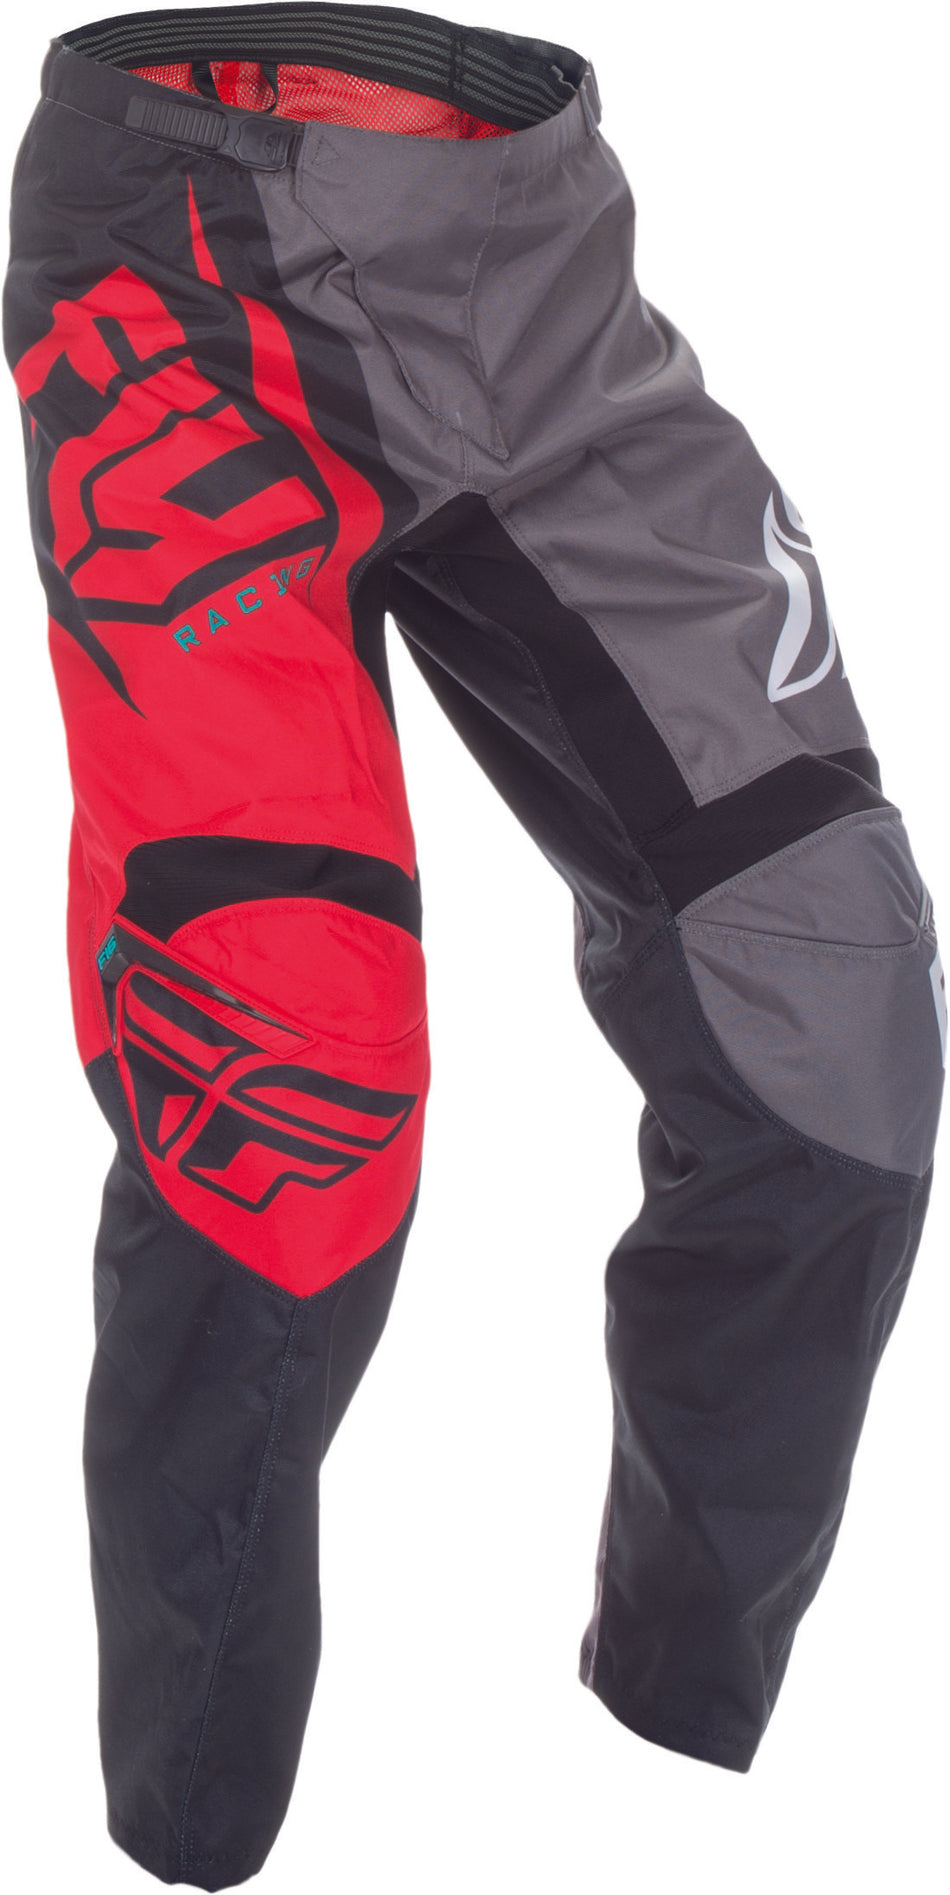 FLY RACING F-16 Pant Red/Black/Grey Sz 22 370-93222